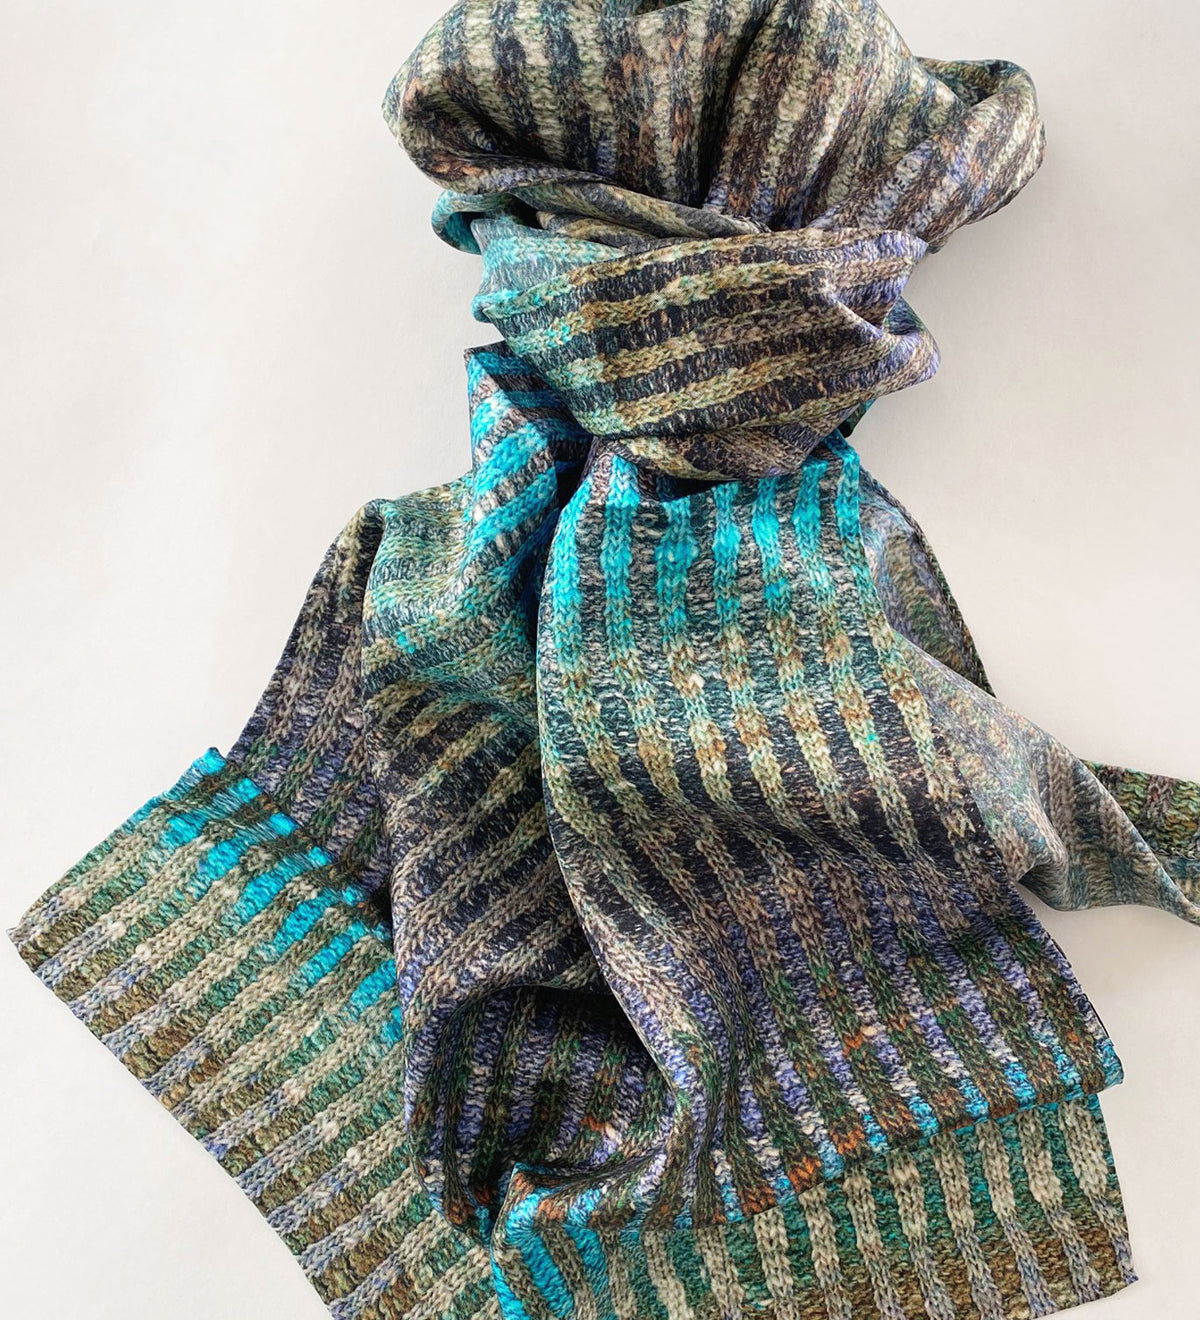 Printed silk scarves with knitted design by Penelope Cream.